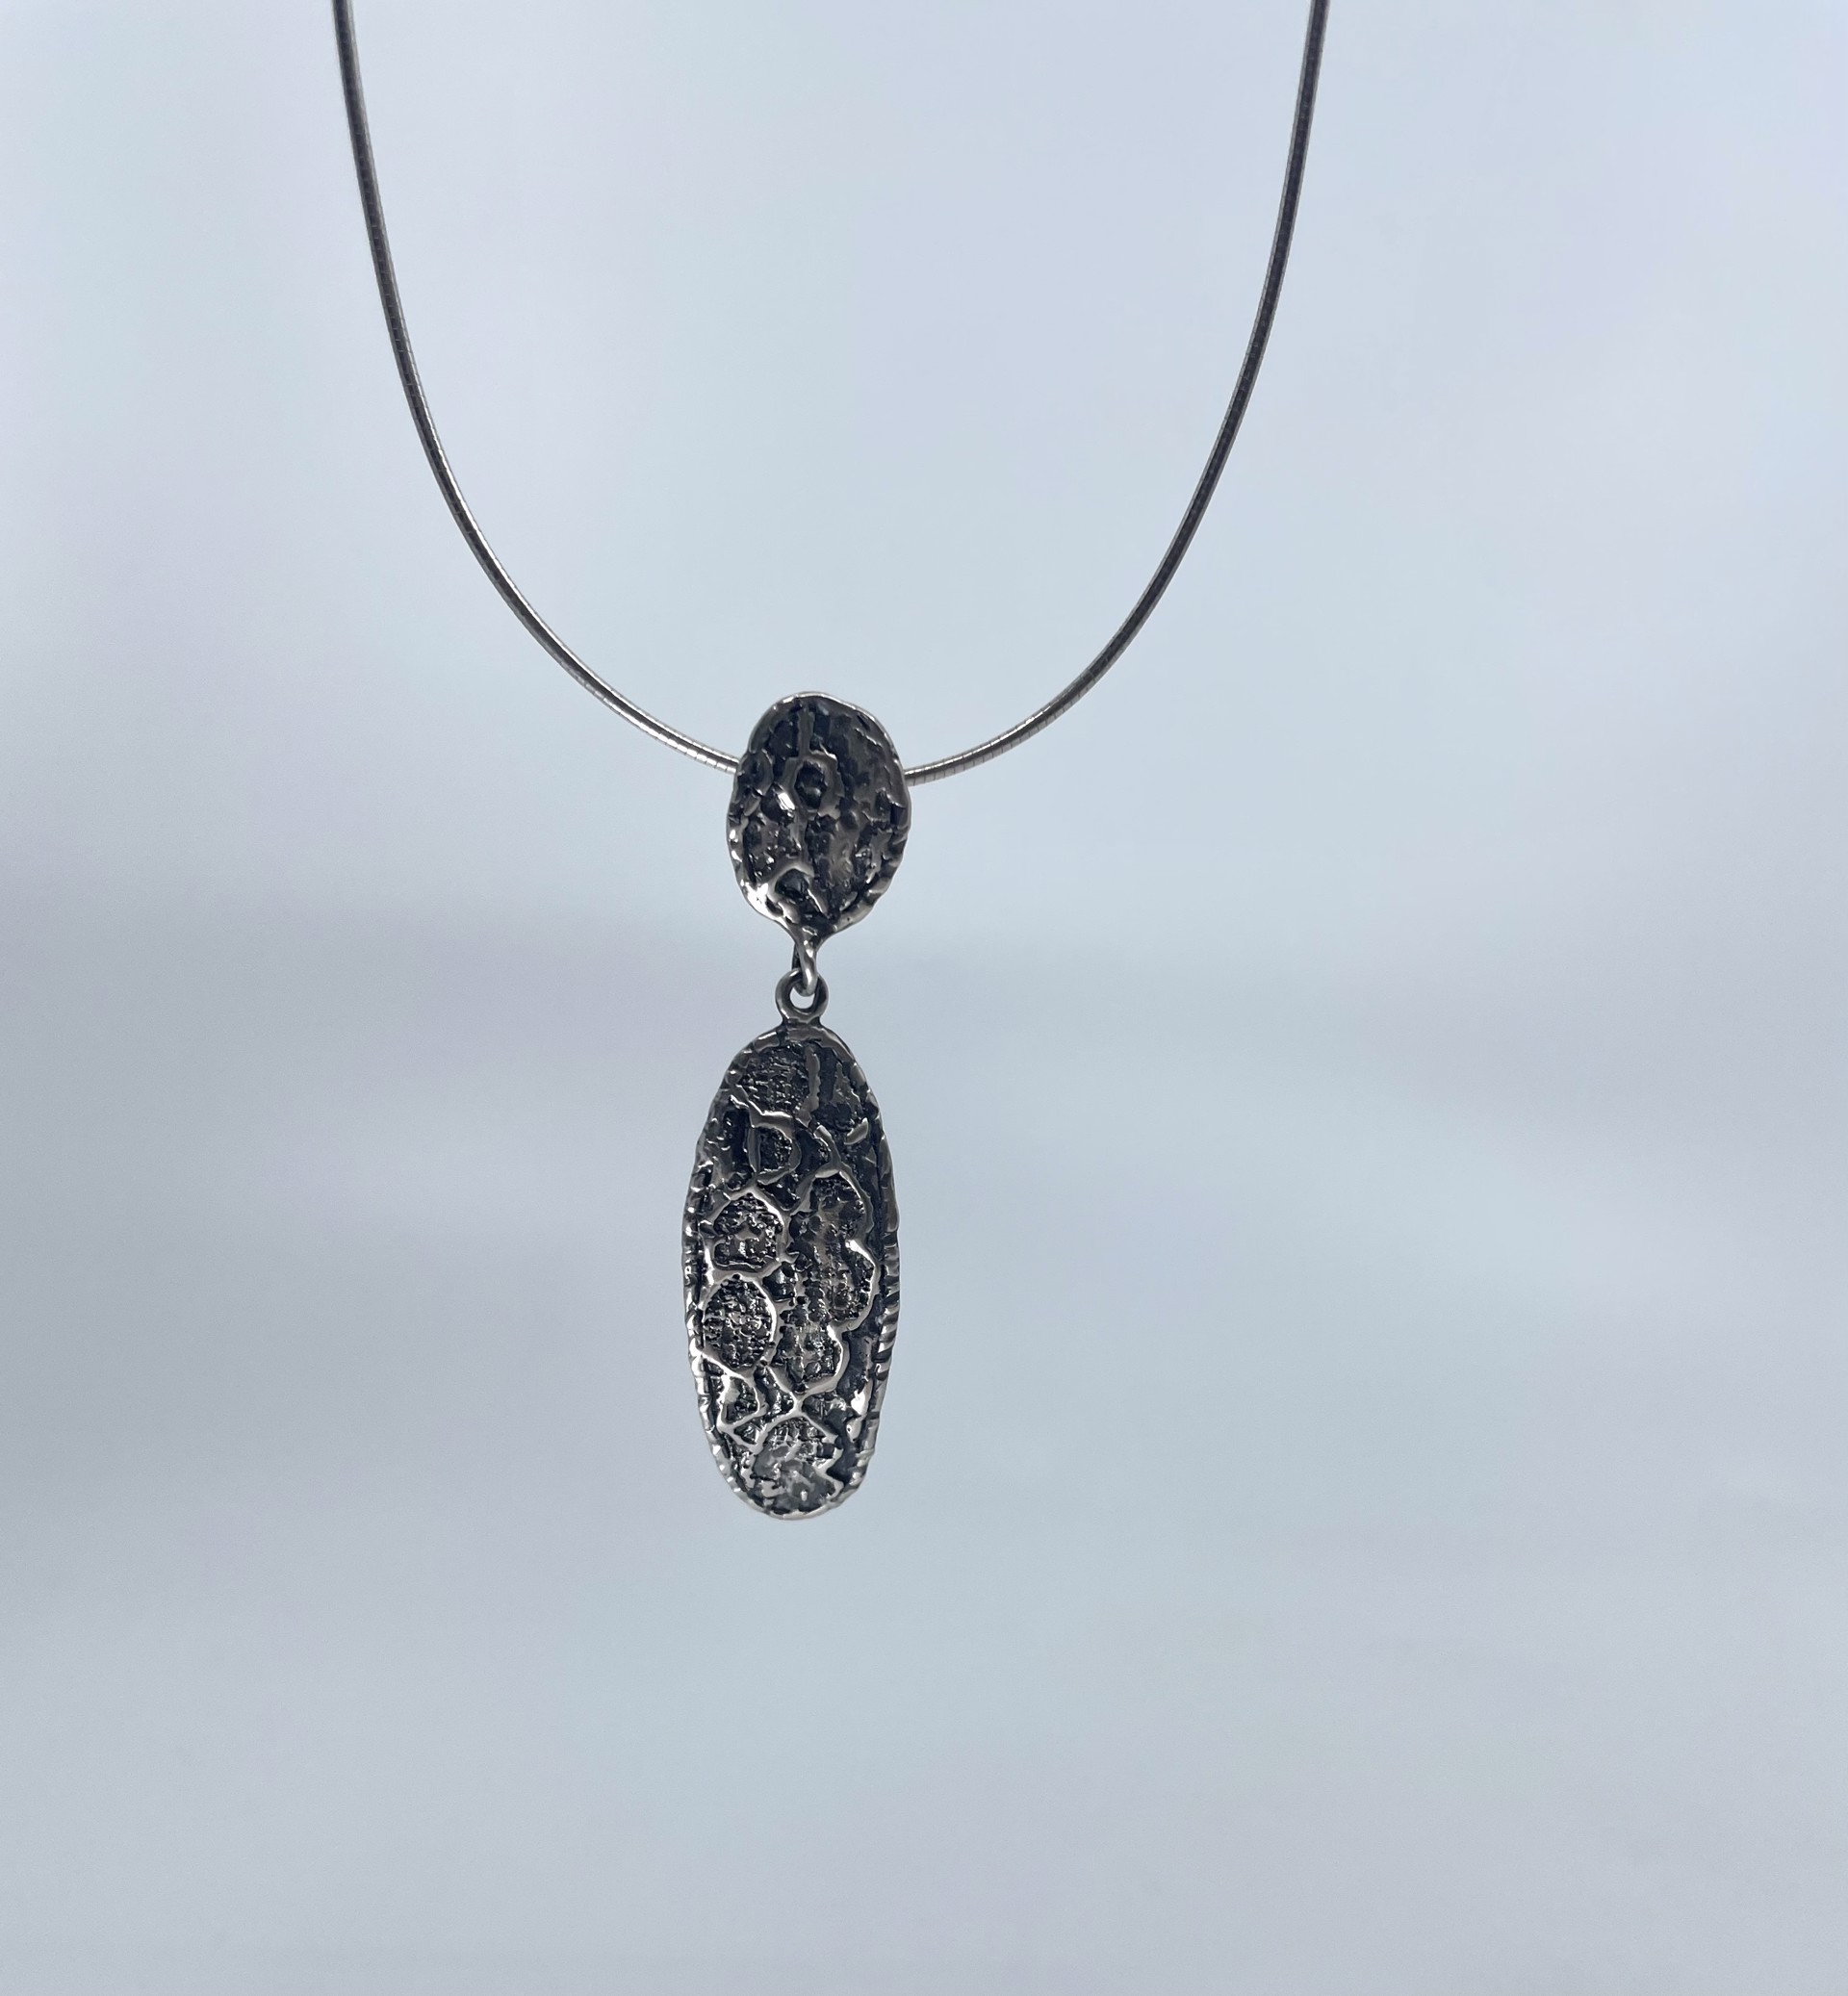 SS 2 Part Real Lace Pendant by Beth Benowich